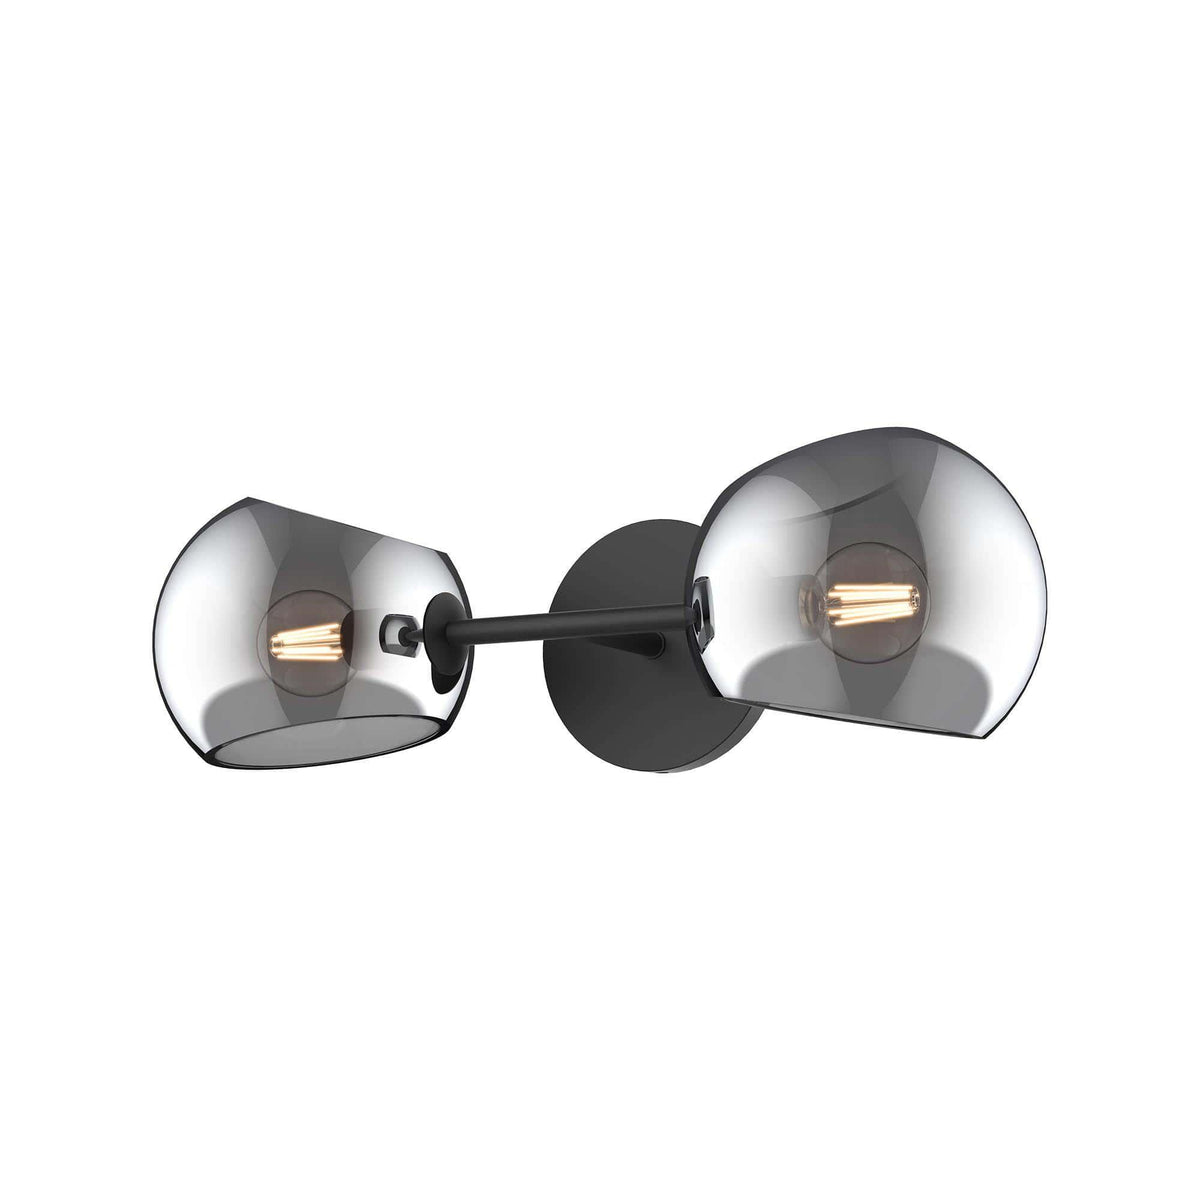 Alora Lighting - Willow Double Wall Sconce - WV548217MBSM | Montreal Lighting & Hardware